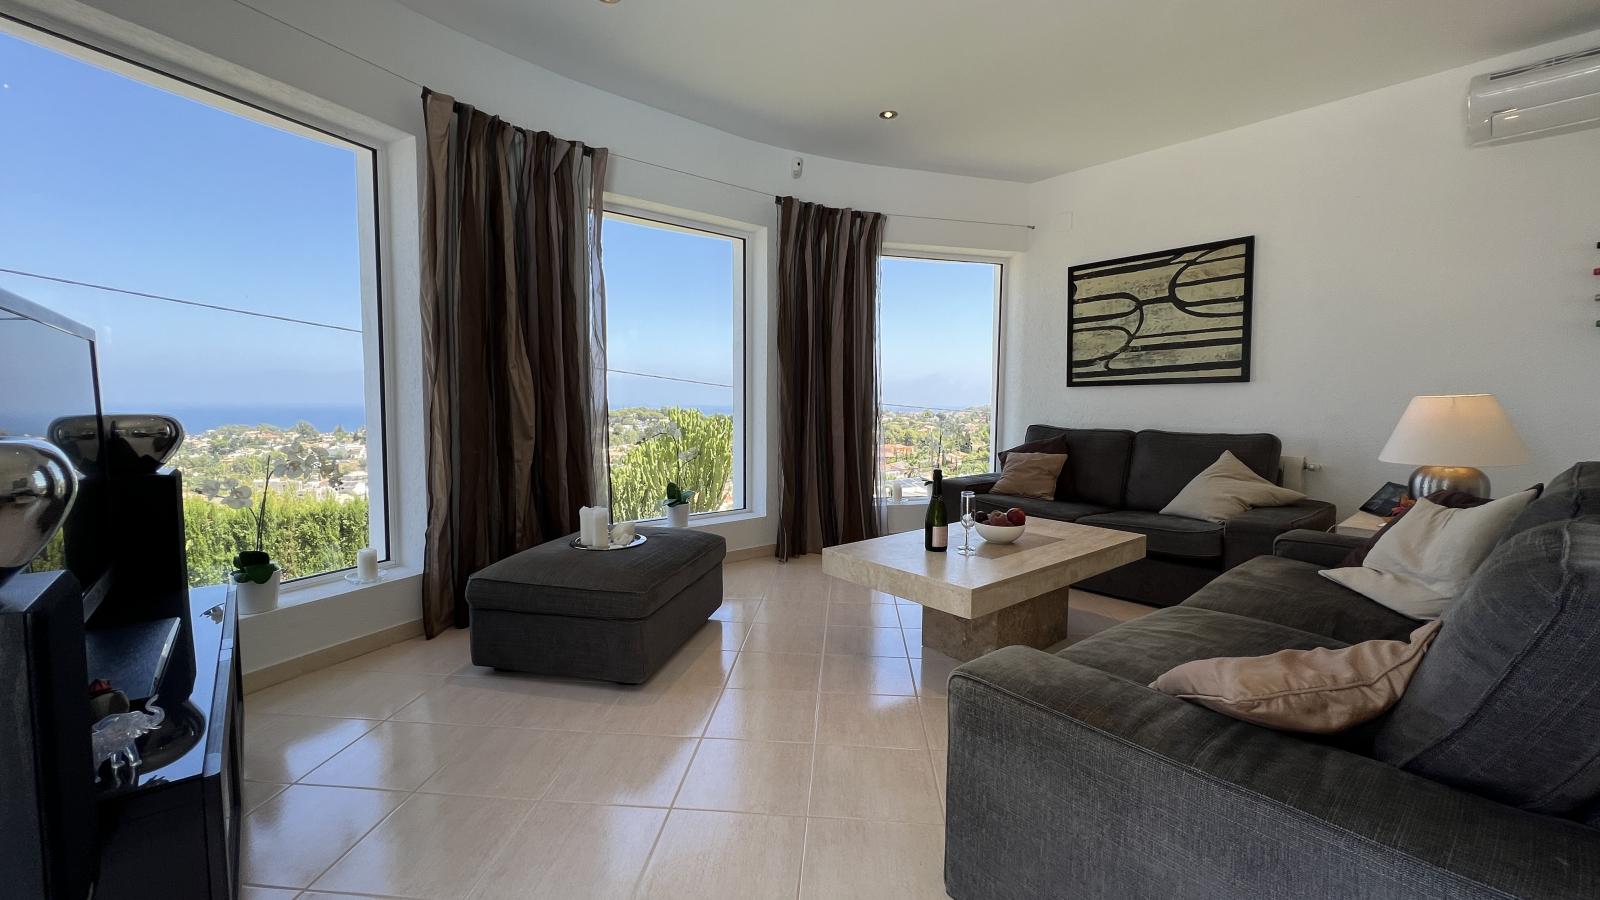 Very beautiful unique double villa with view over the harbor and the sea